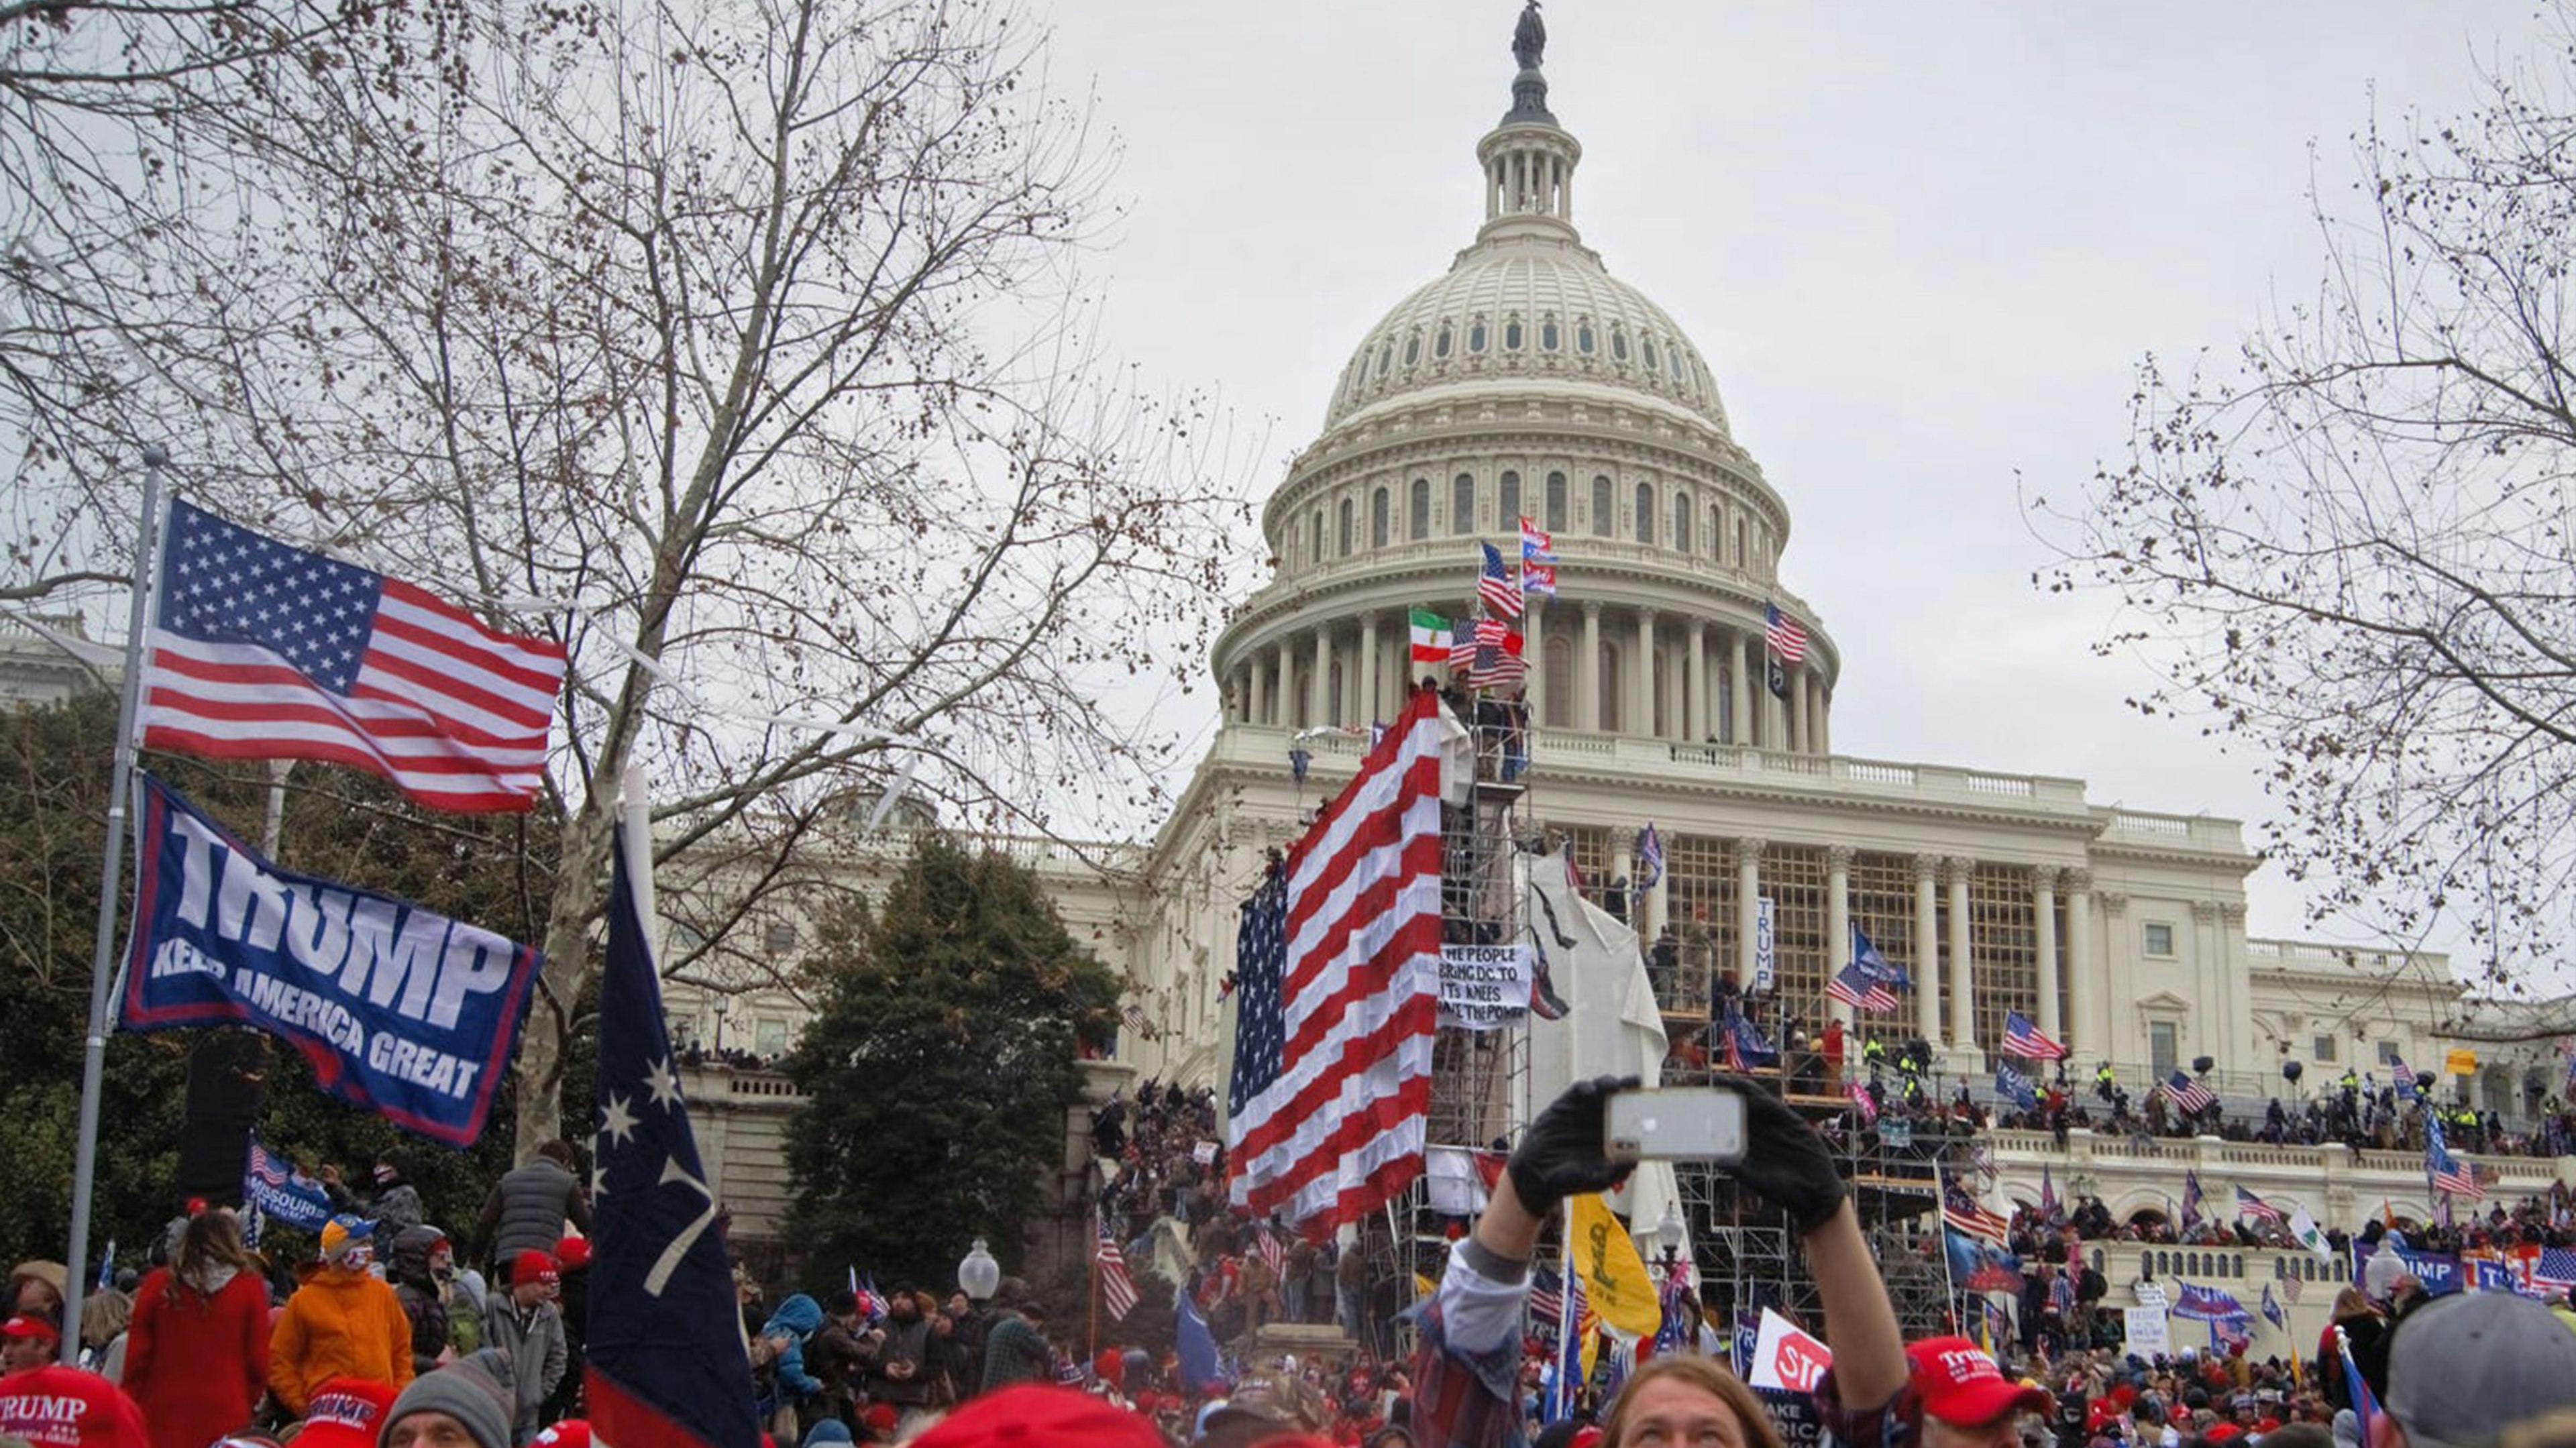 Photo of protesters at U.S. Capitol in Washington, D.C. on January 6, 2021 during insurrection. People stand on stairs outside Capitol Building with American flags and a 'Trump Make America Great Again' flag.